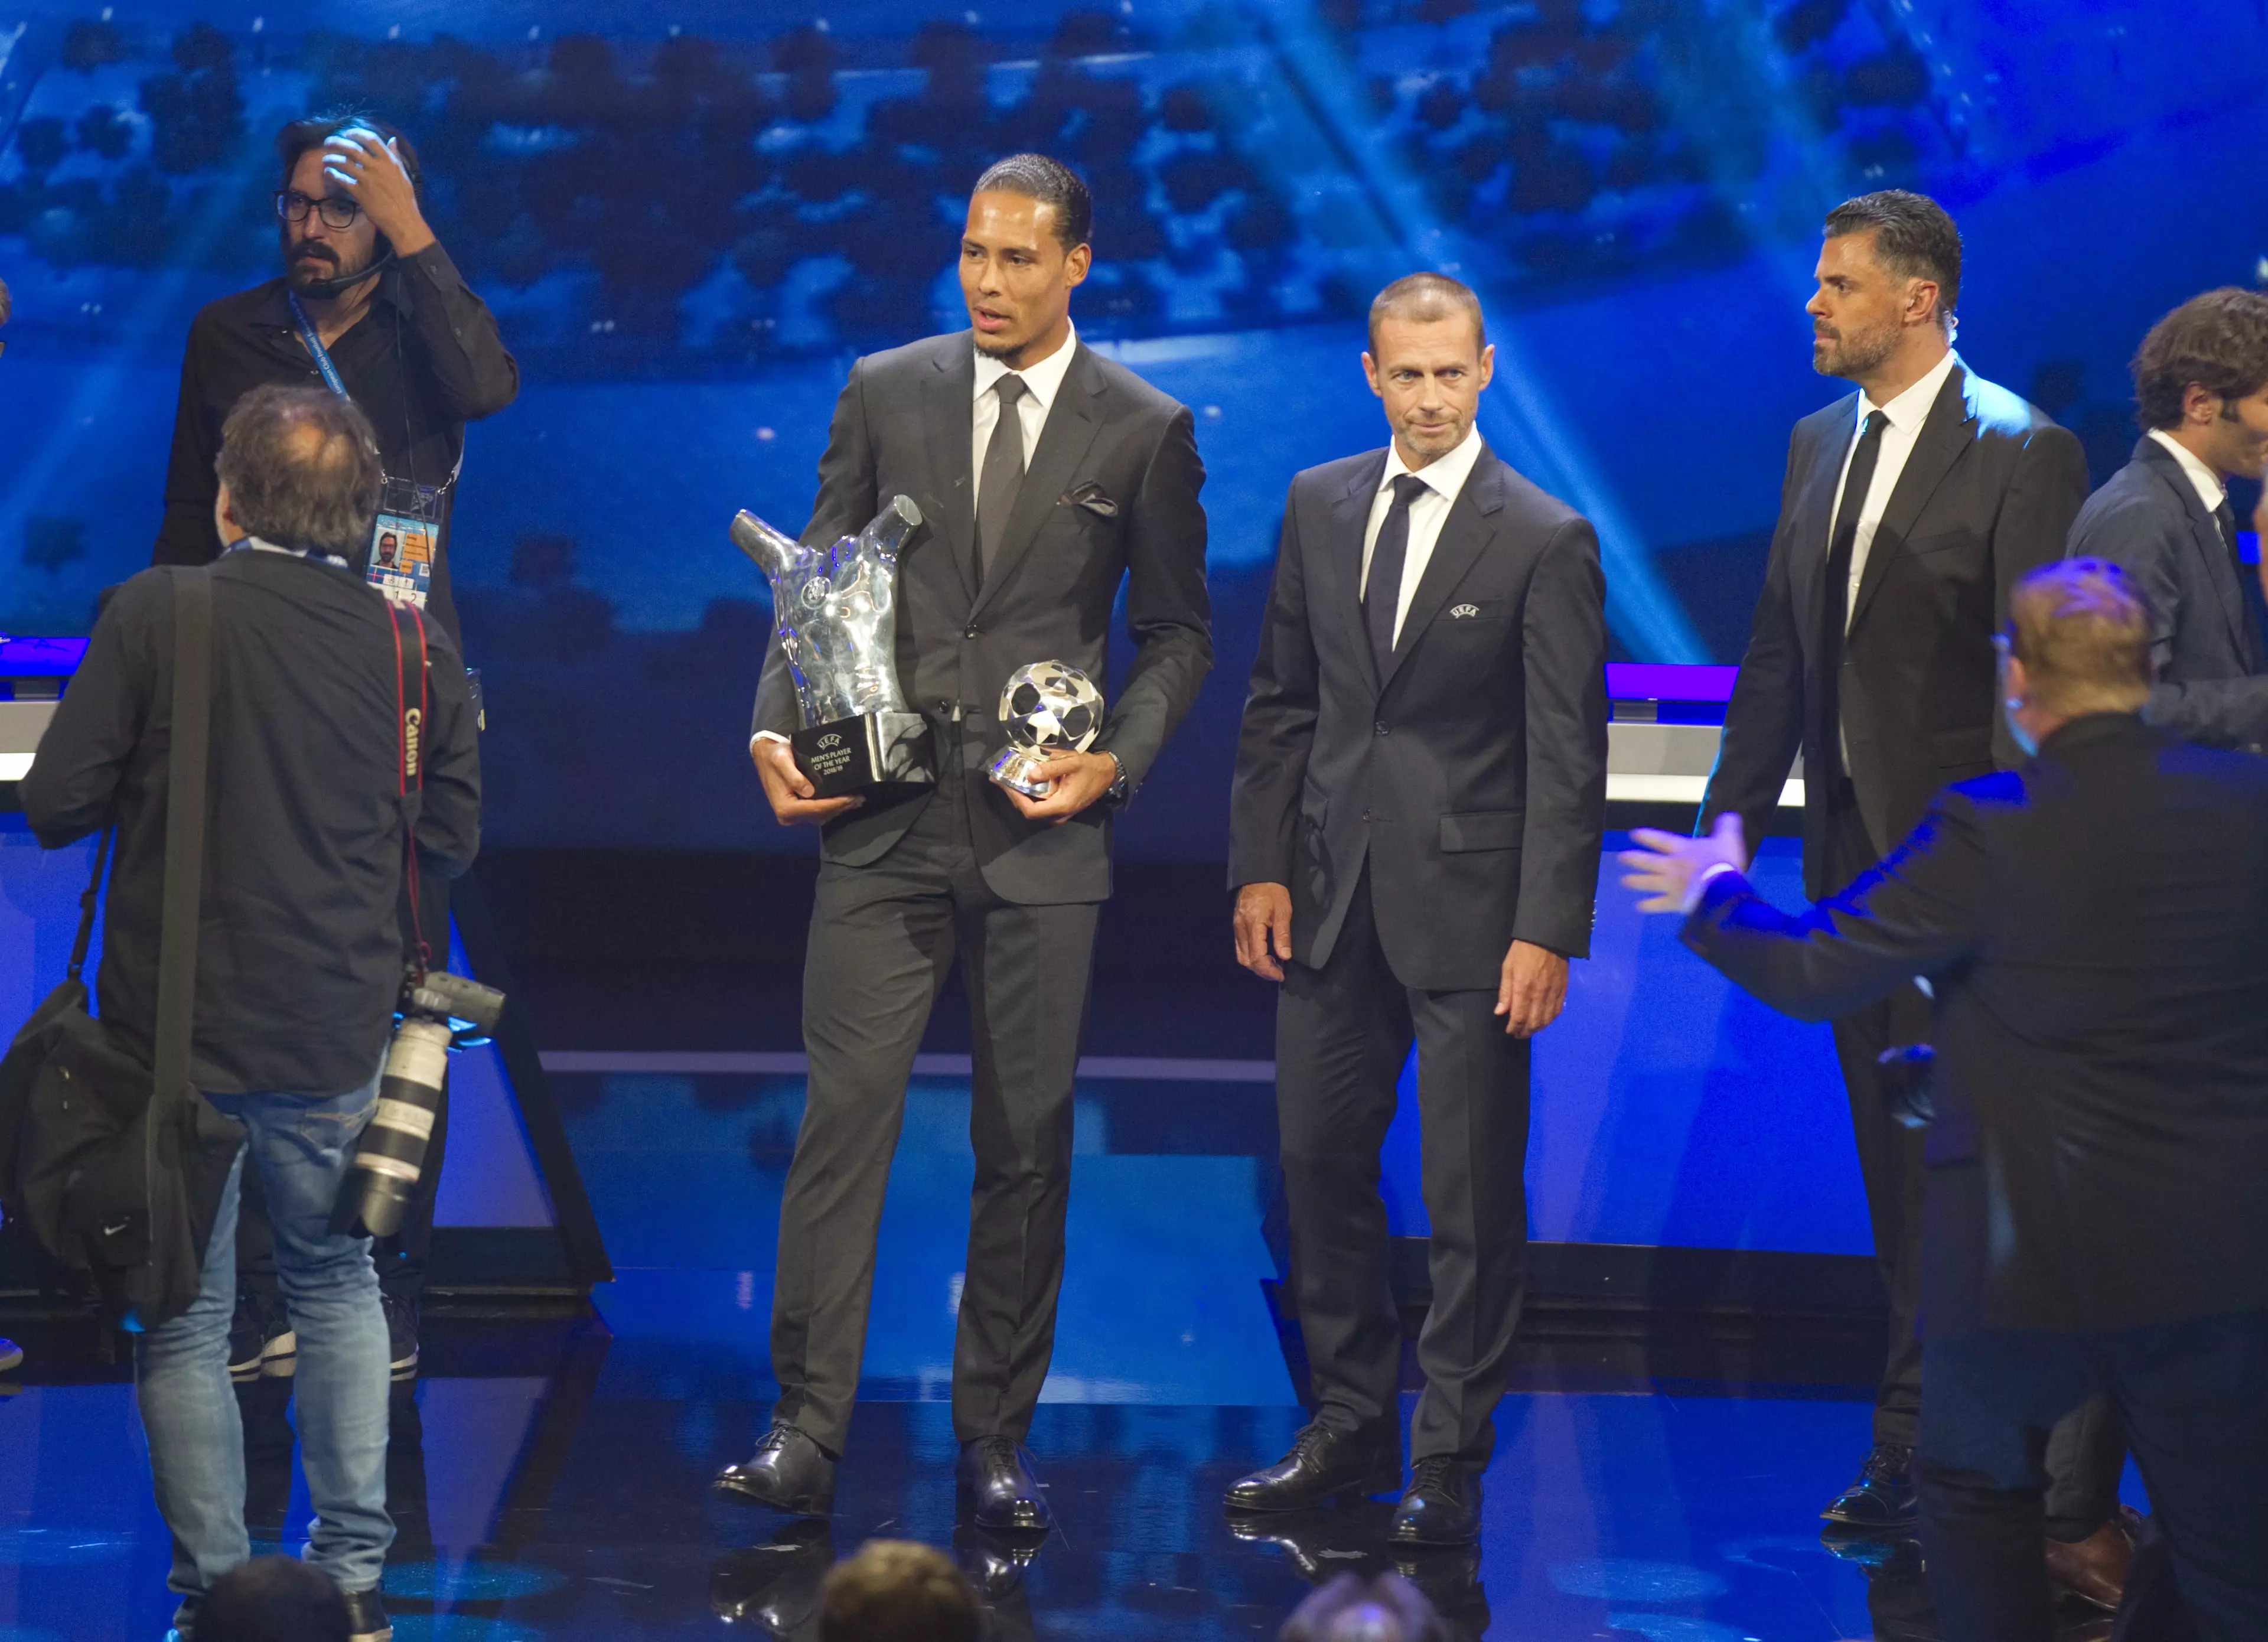 Van Dijk beat Messi and Ronaldo into second and third respectively to the UEFA award. Image: PA Images